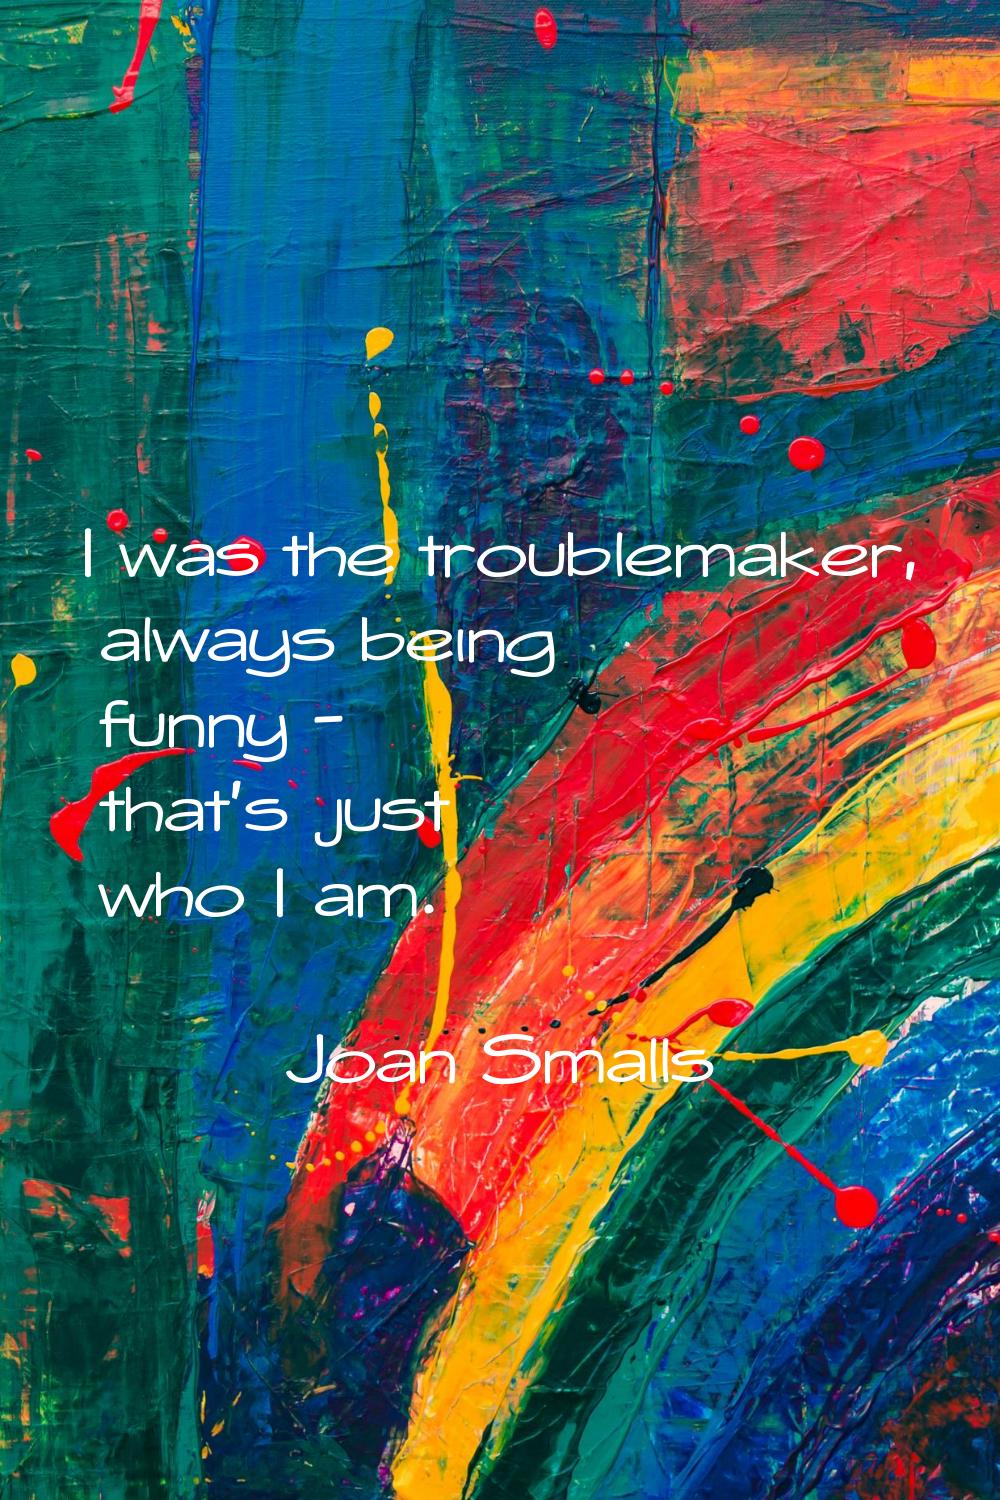 I was the troublemaker, always being funny - that's just who I am.